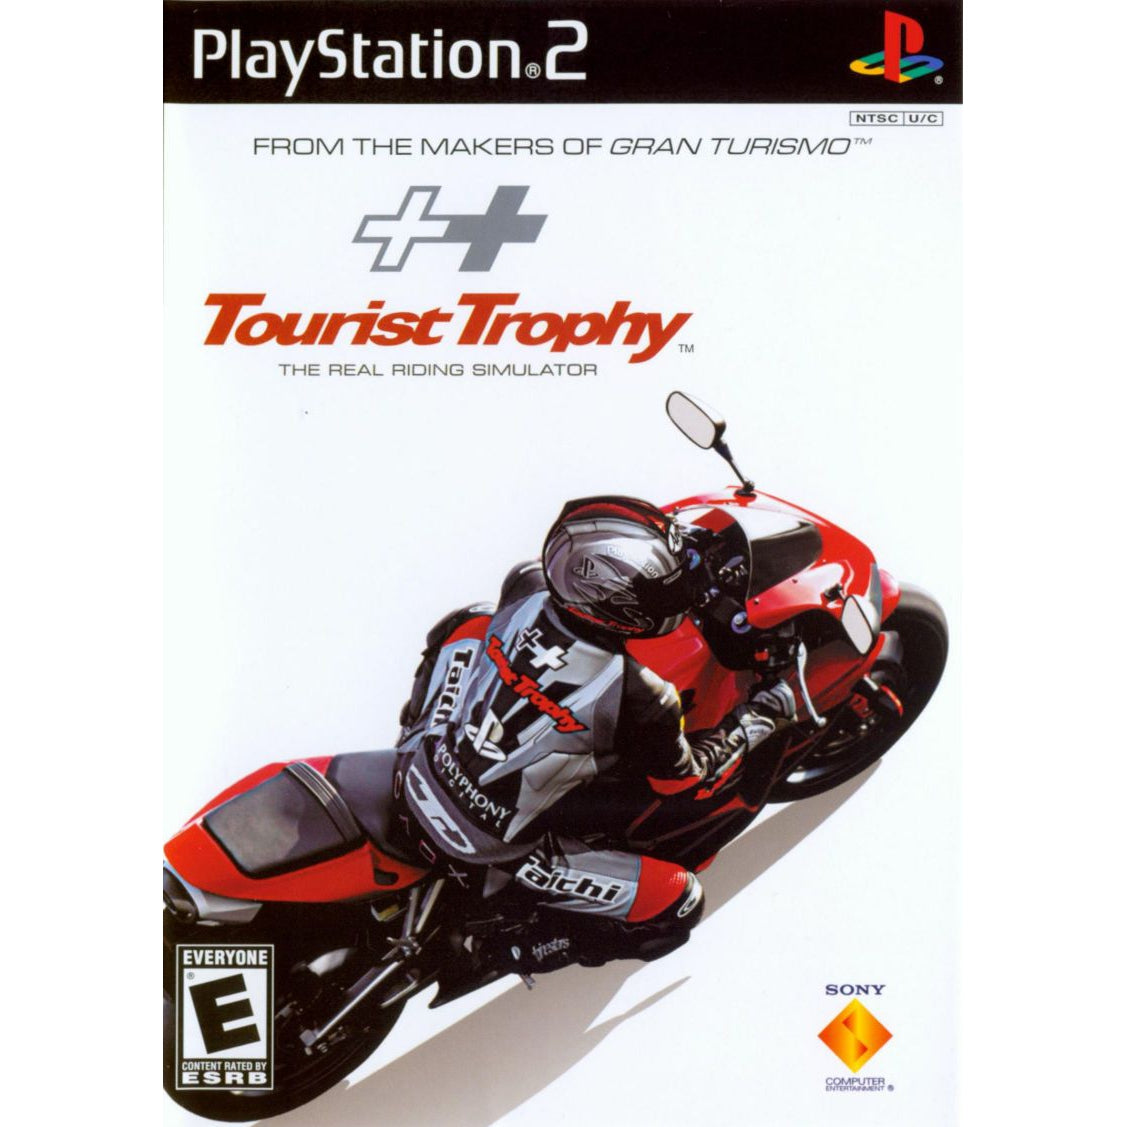 Tourist Trophy - PlayStation 2 (PS2) Game Complete - YourGamingShop.com - Buy, Sell, Trade Video Games Online. 120 Day Warranty. Satisfaction Guaranteed.